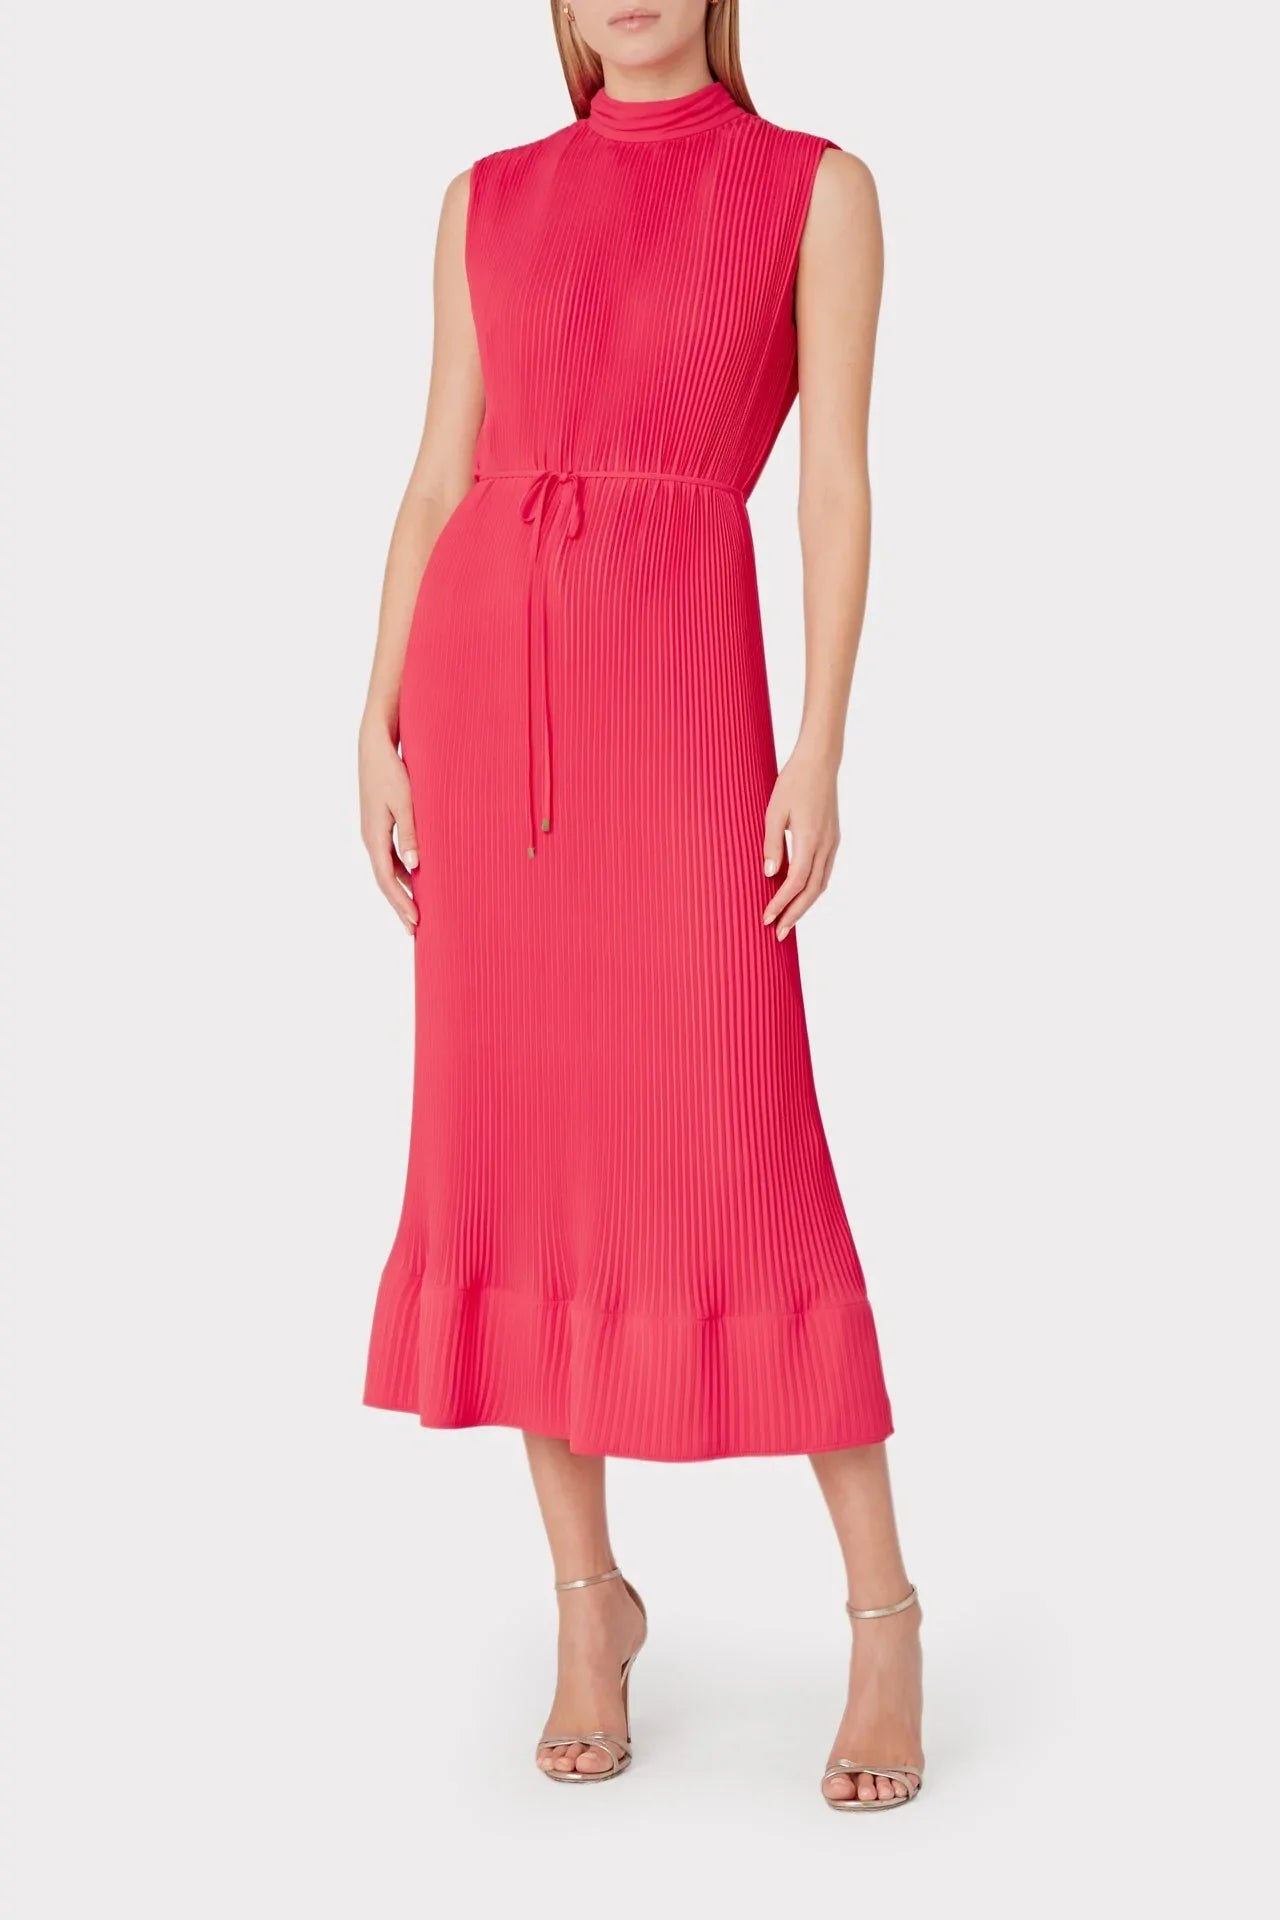 Milly Melina Solid Pleated Dress - Milly Pink